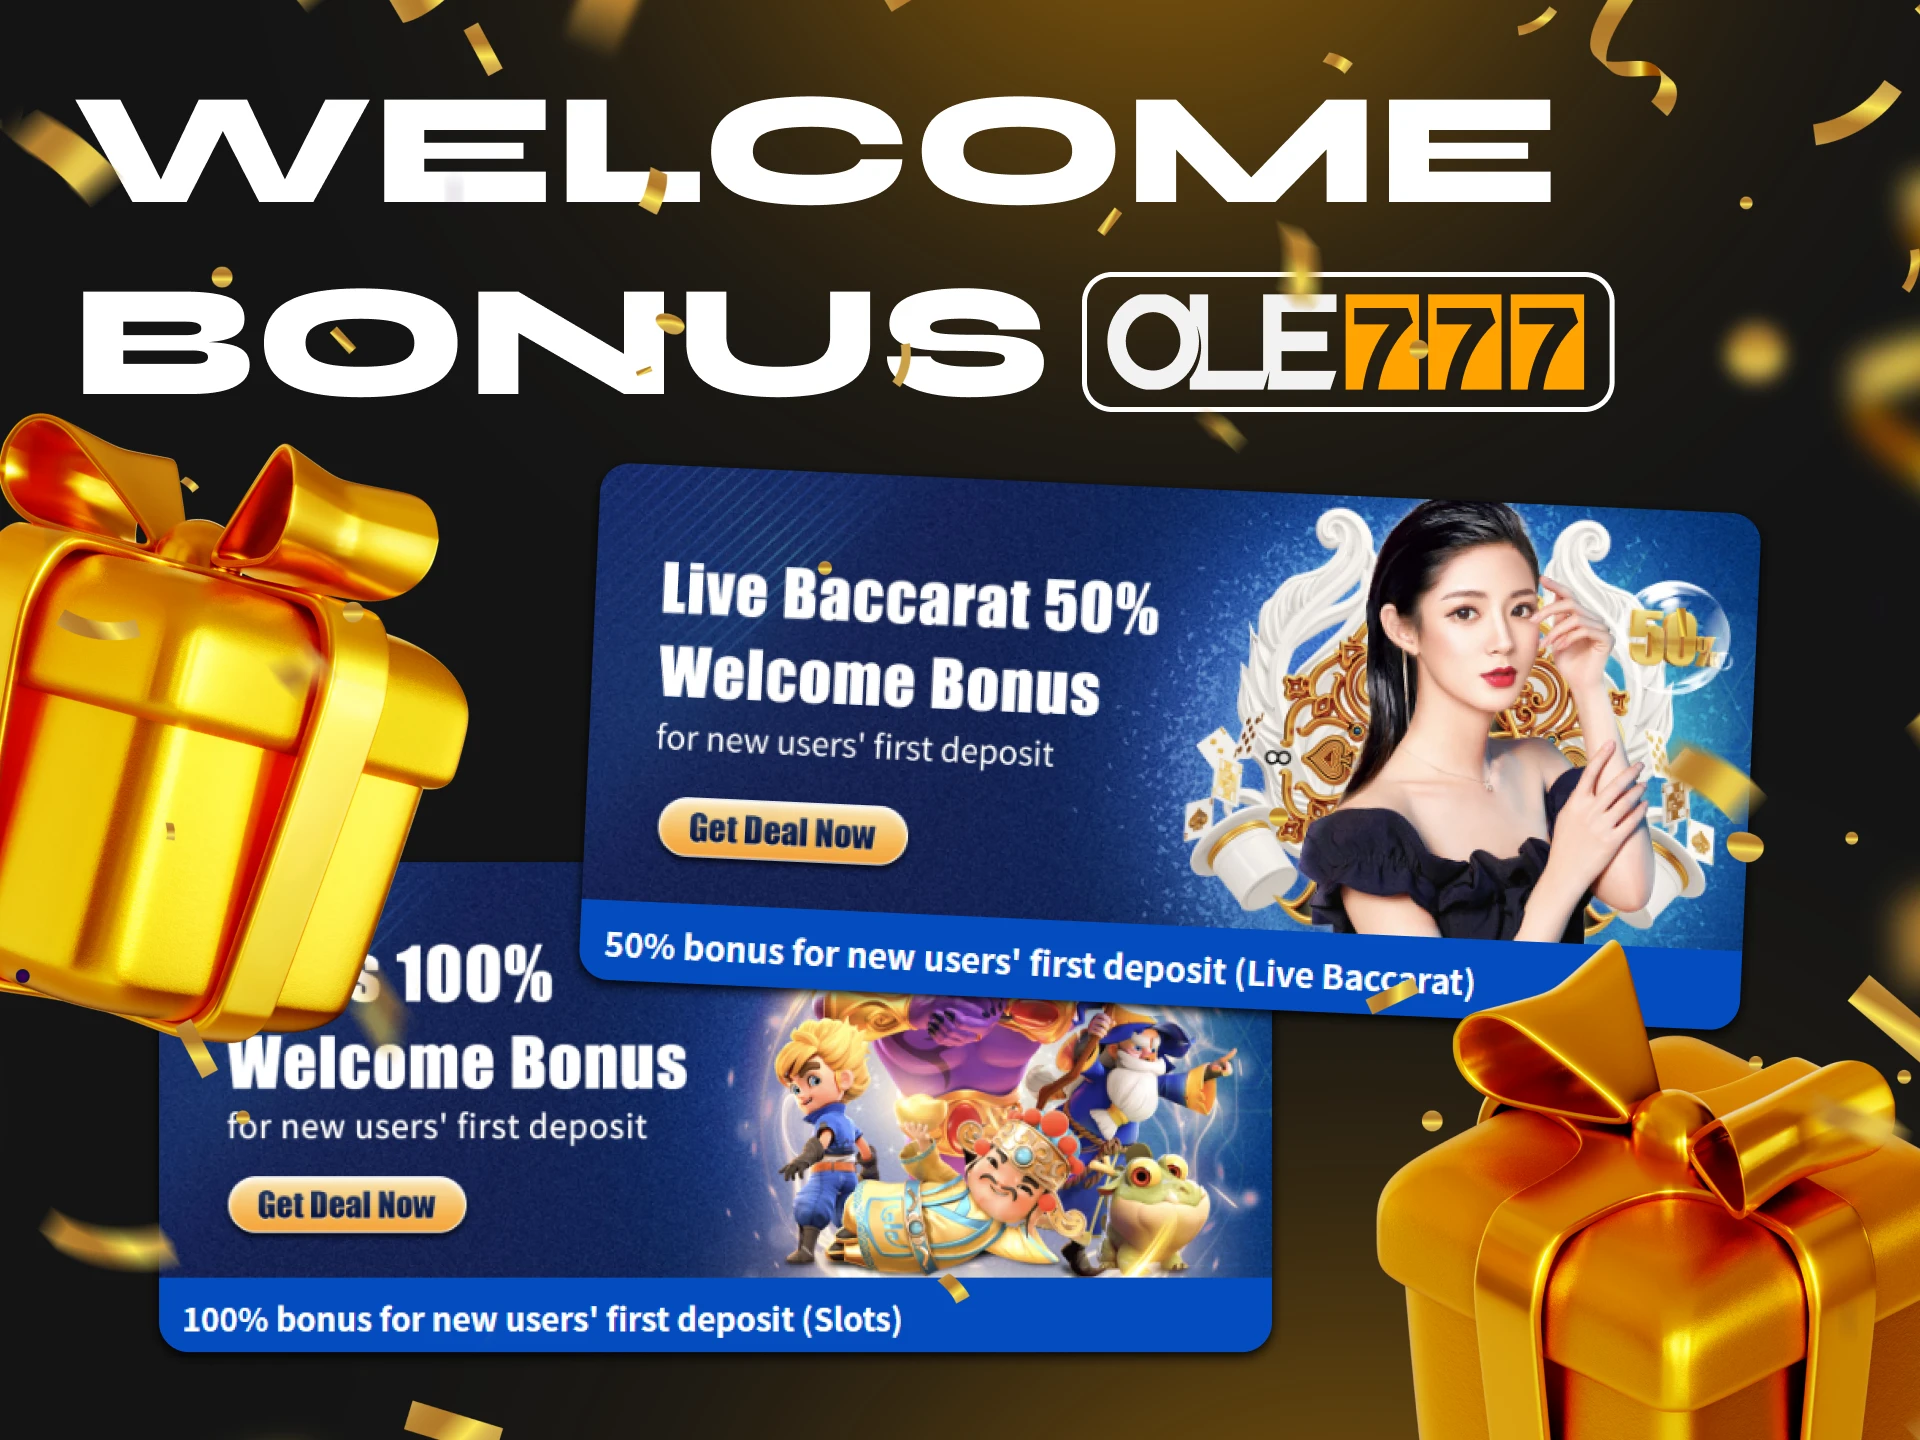 Ole777 Casino offers many different welcome bonuses.